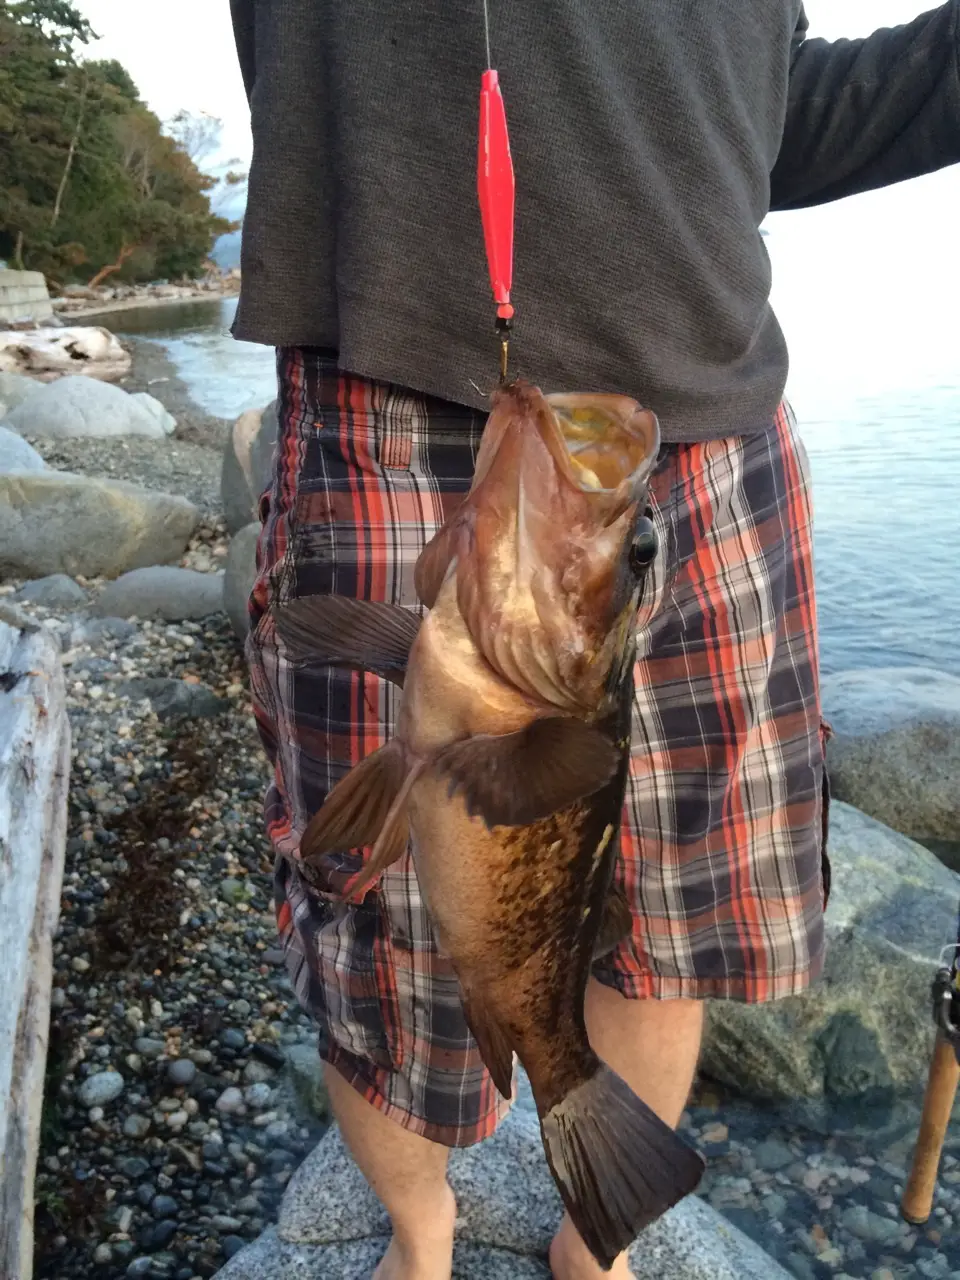 Red Rockfish from Beach